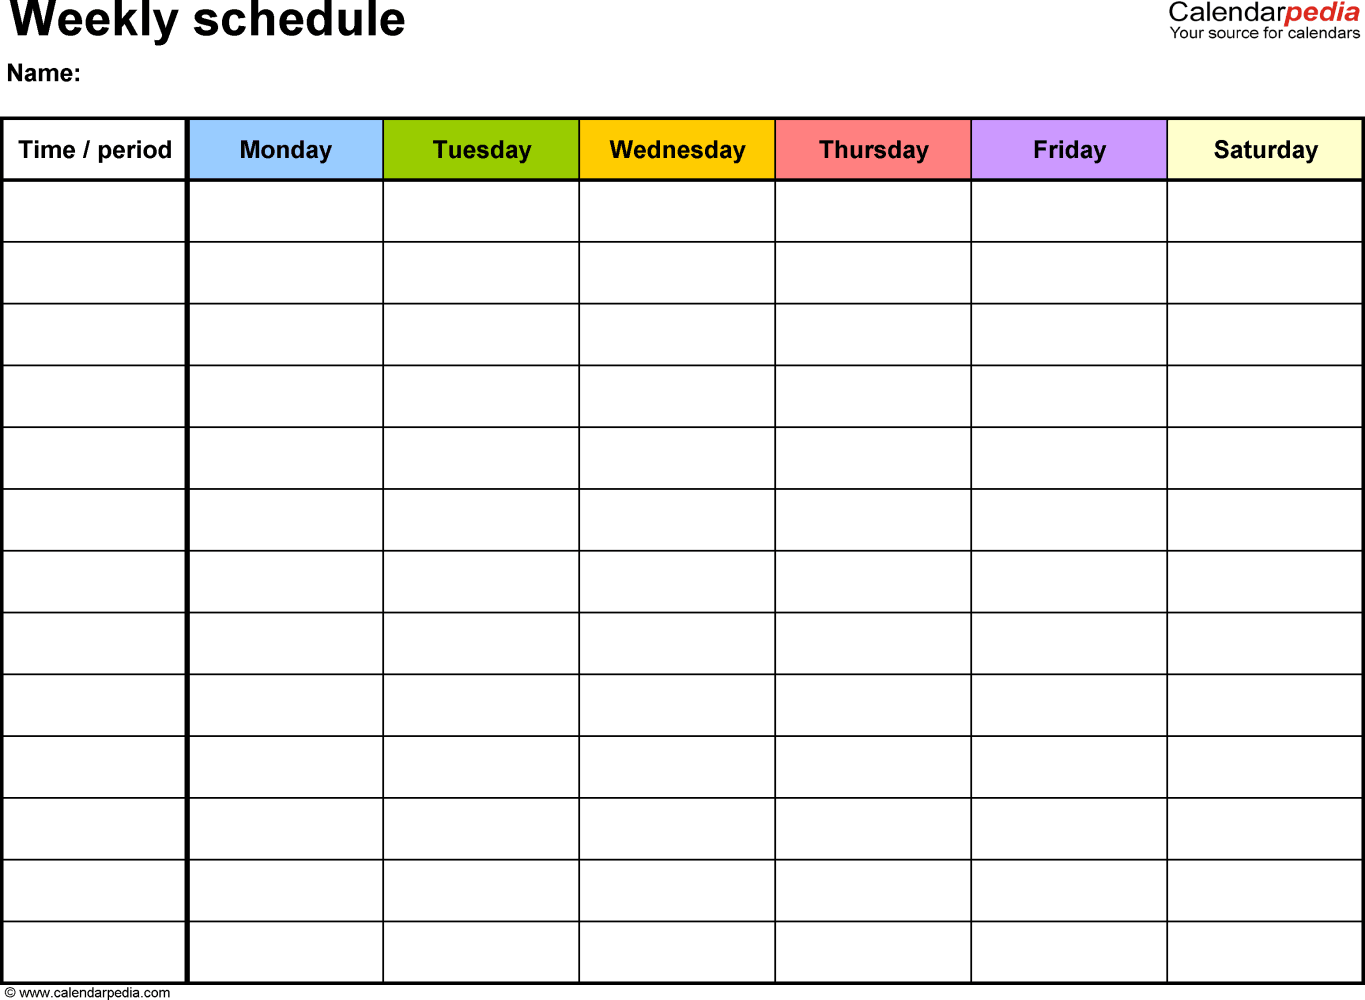 Weekly Schedule Templates for Excel